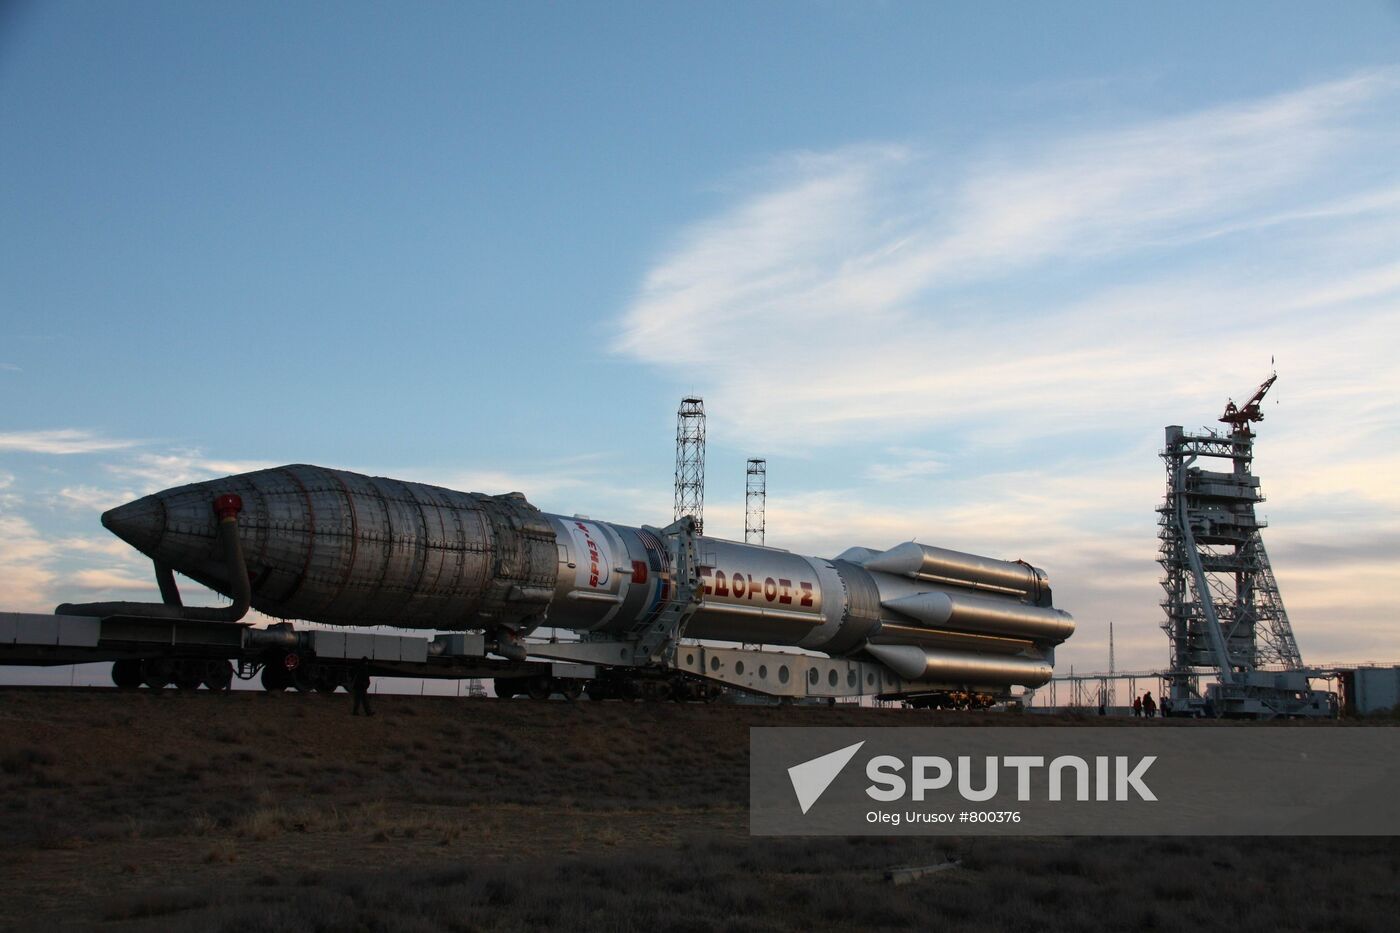 Proton-M rocket with Canadian-U.S. SkyTerra at the launch site